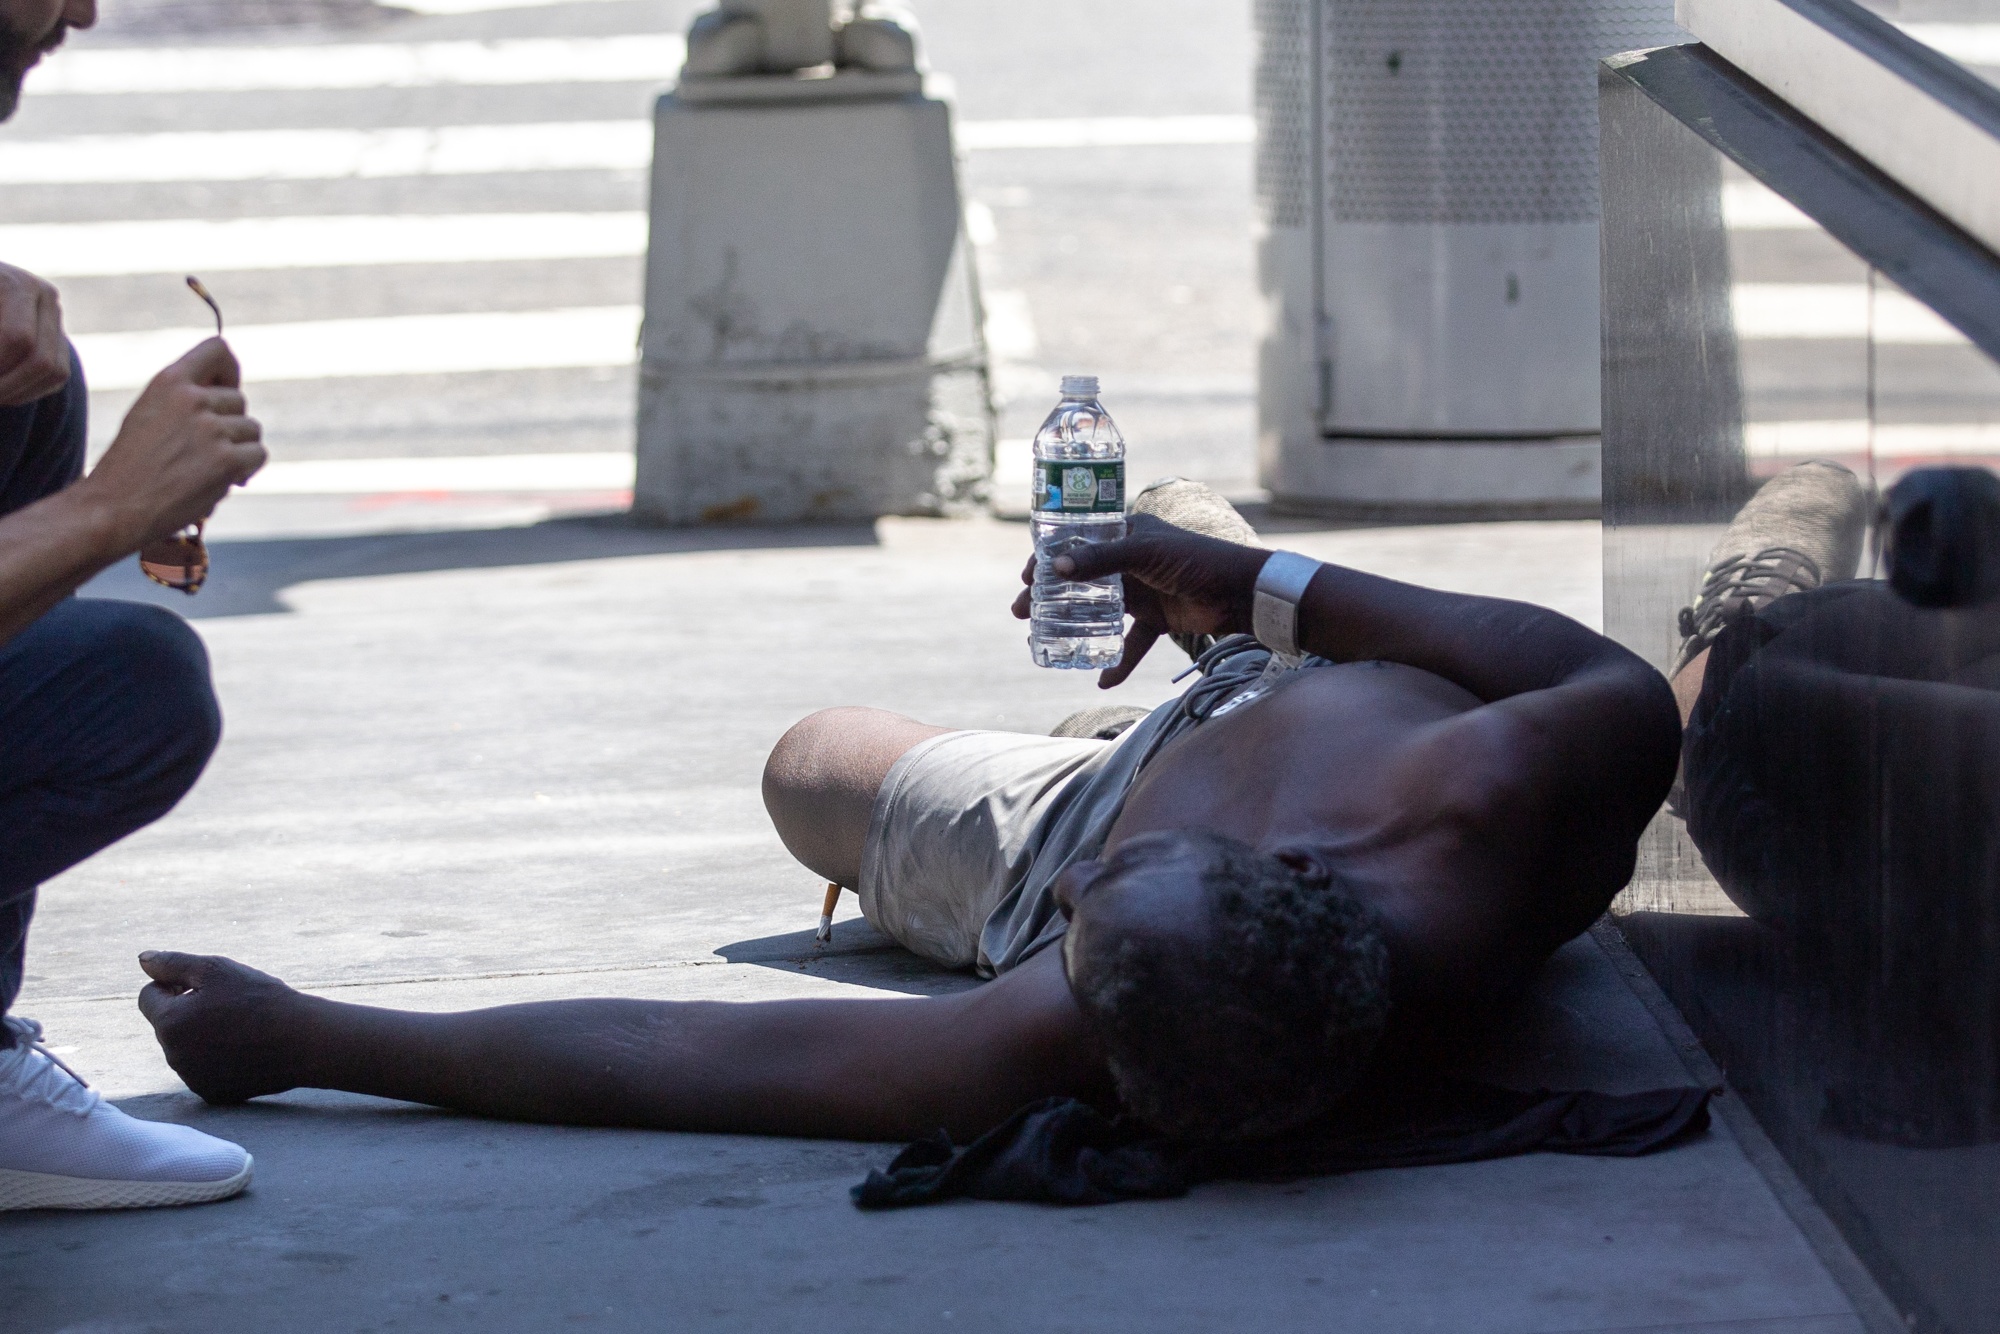 A person lays on the street near Times Square during a heatwave in New York, U.S., on Wednesday, June 30, 2021.